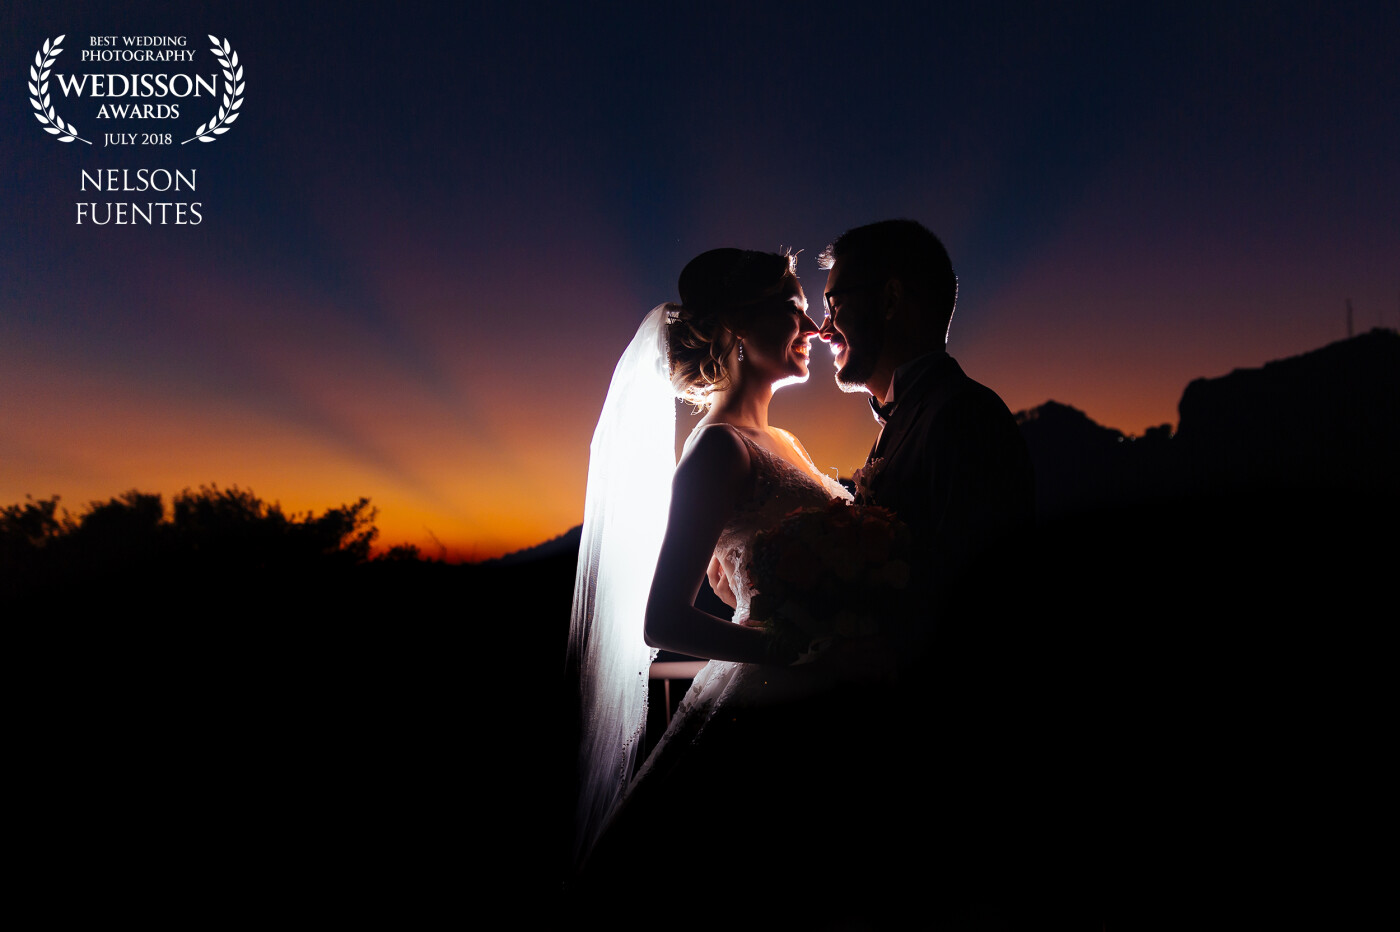 As the wedding ceremony ended I saw these beautiful sun rays hiding behind the mountains.  We had to rush with the couple to capture it. The look on their faces and the colors of the sunset made me fall in love with this moment. 